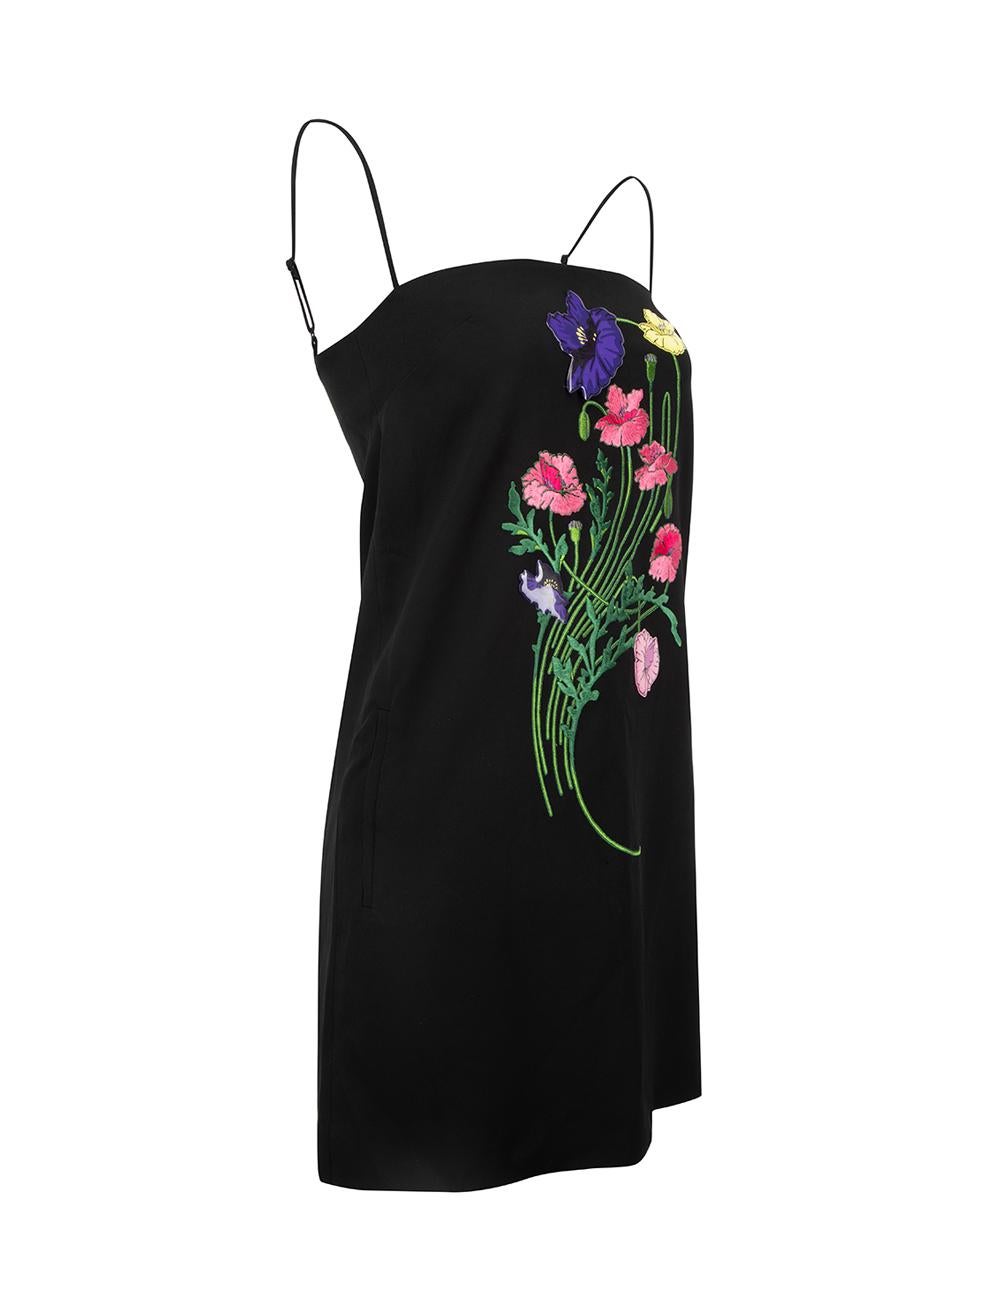 CONDITION is Never worn, with tags. No visible wear to dress is evident on this new Christopher Kane designer resale item.



Details


Black

Viscose

Mini dress

Flower embroidered and stickers detail

Adjustable shoulder spaghetti strap

Front